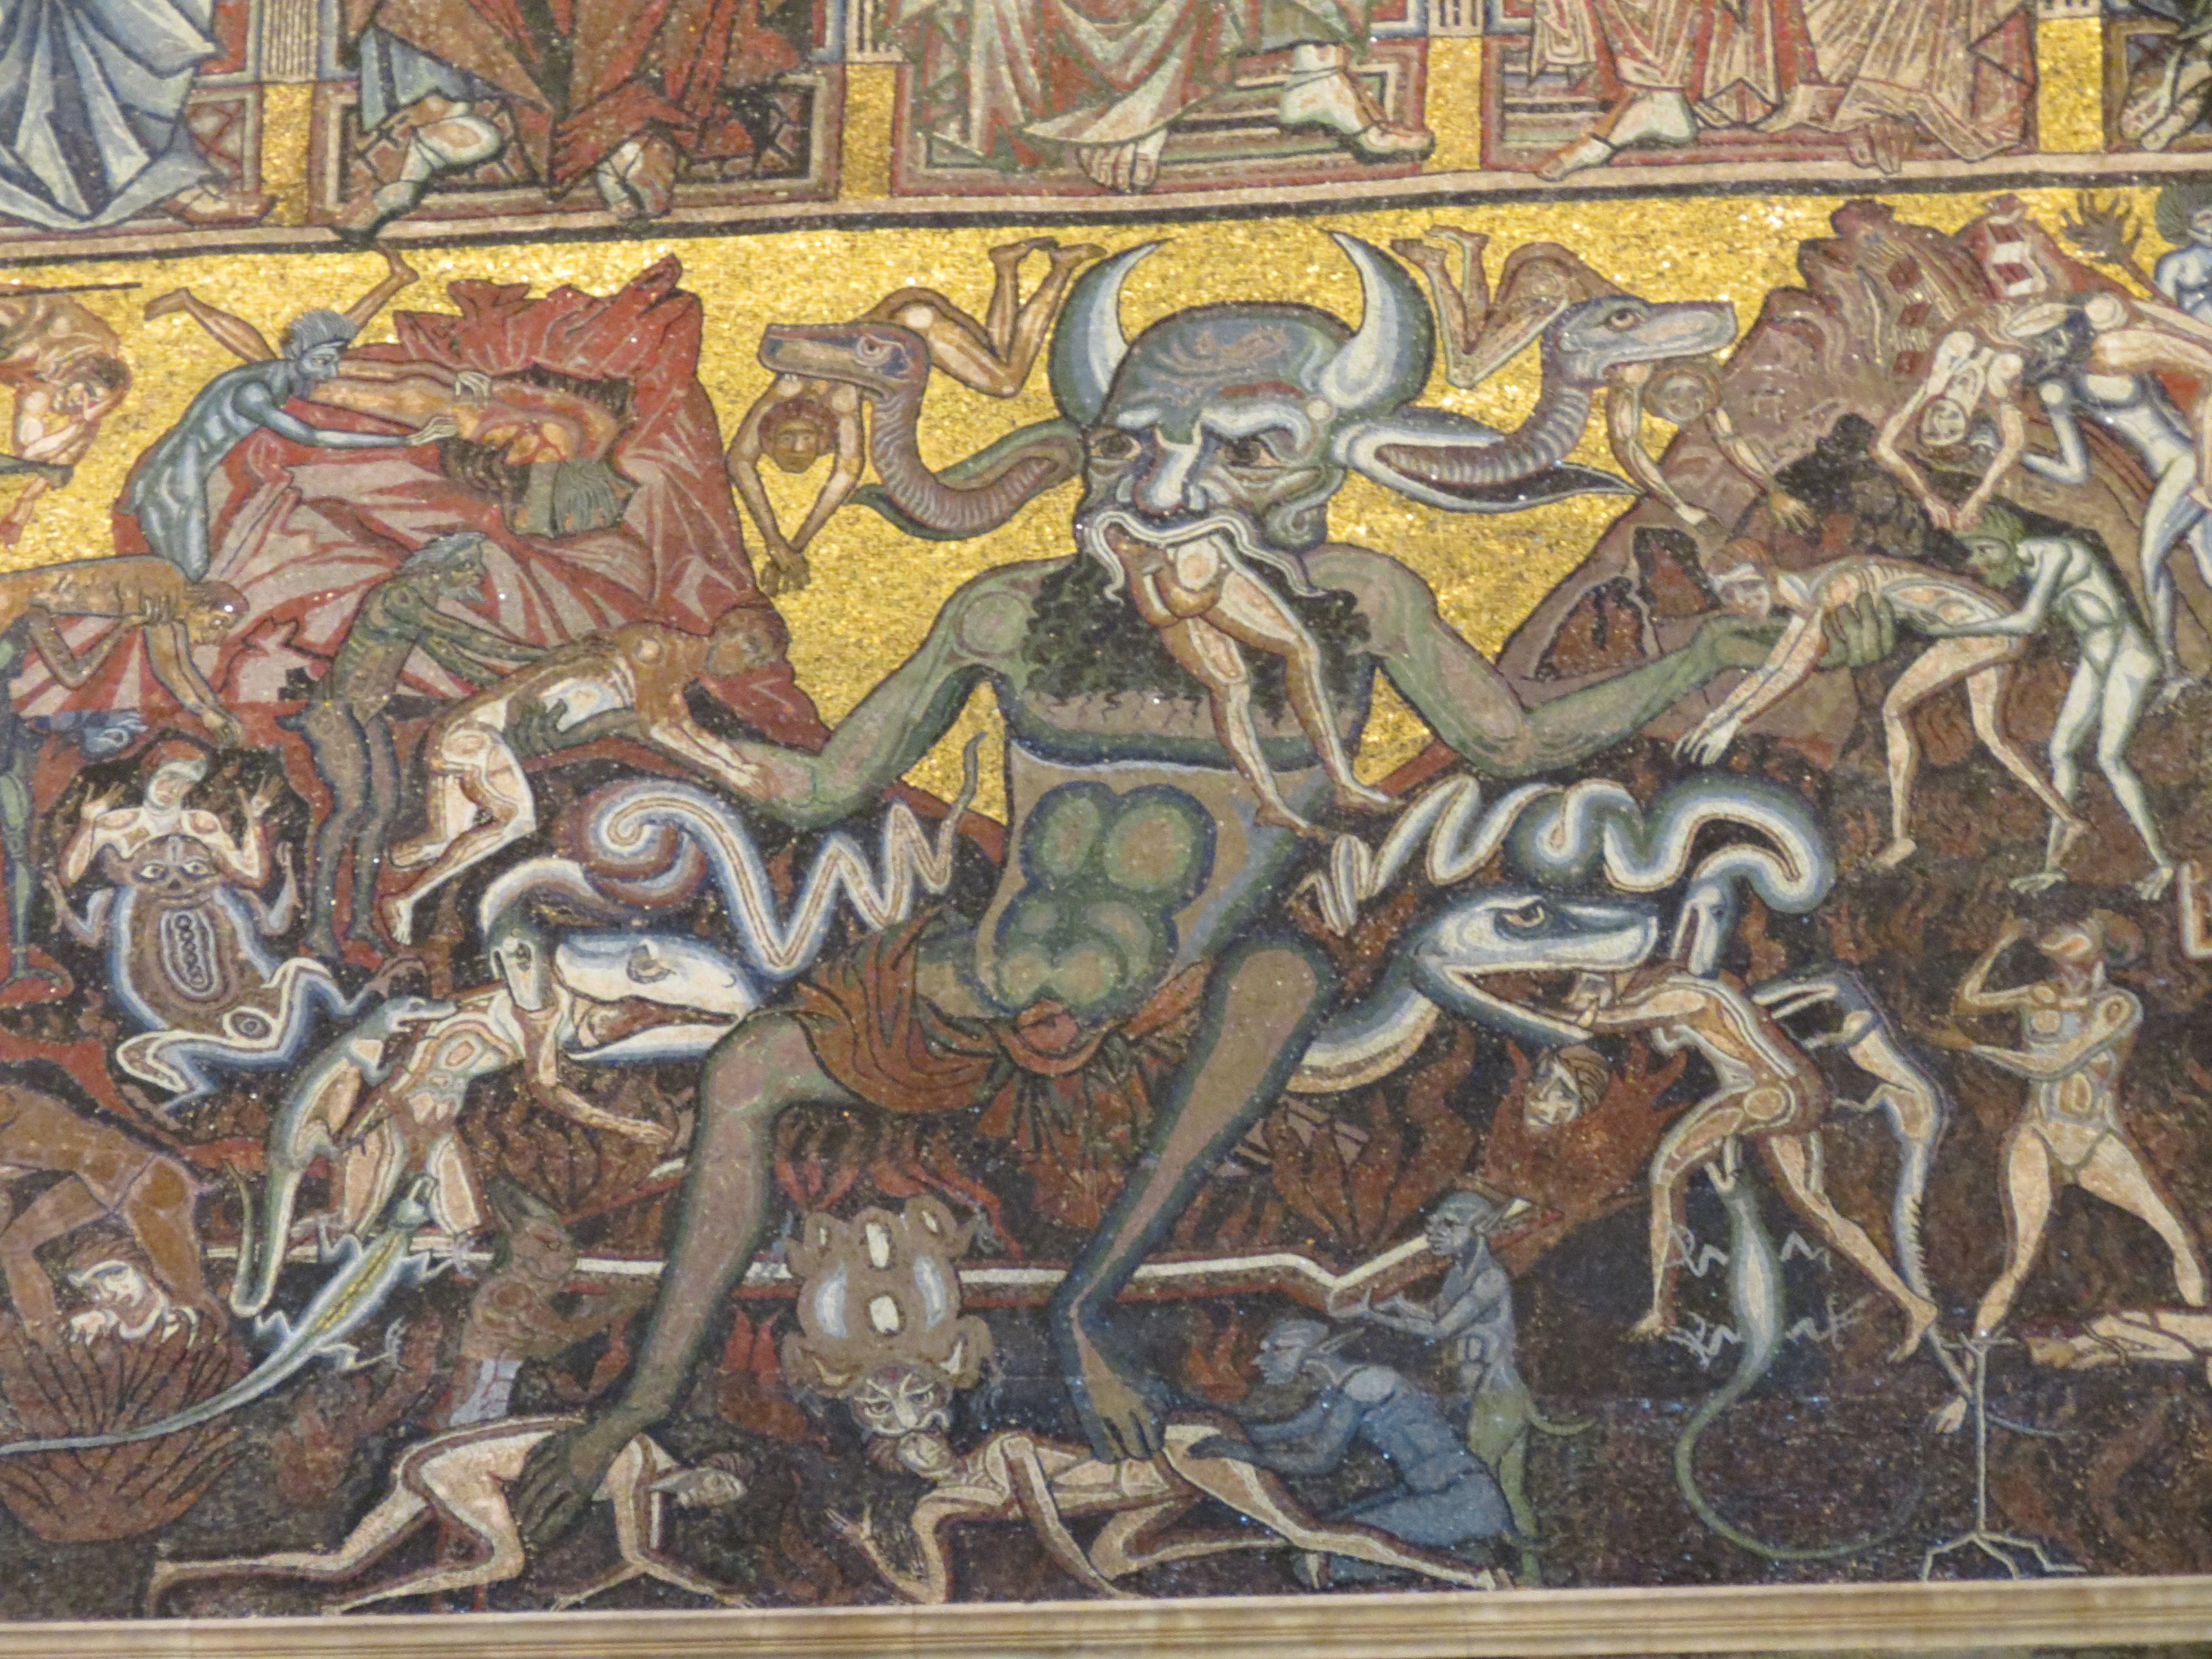 Hell from a medieval perspective